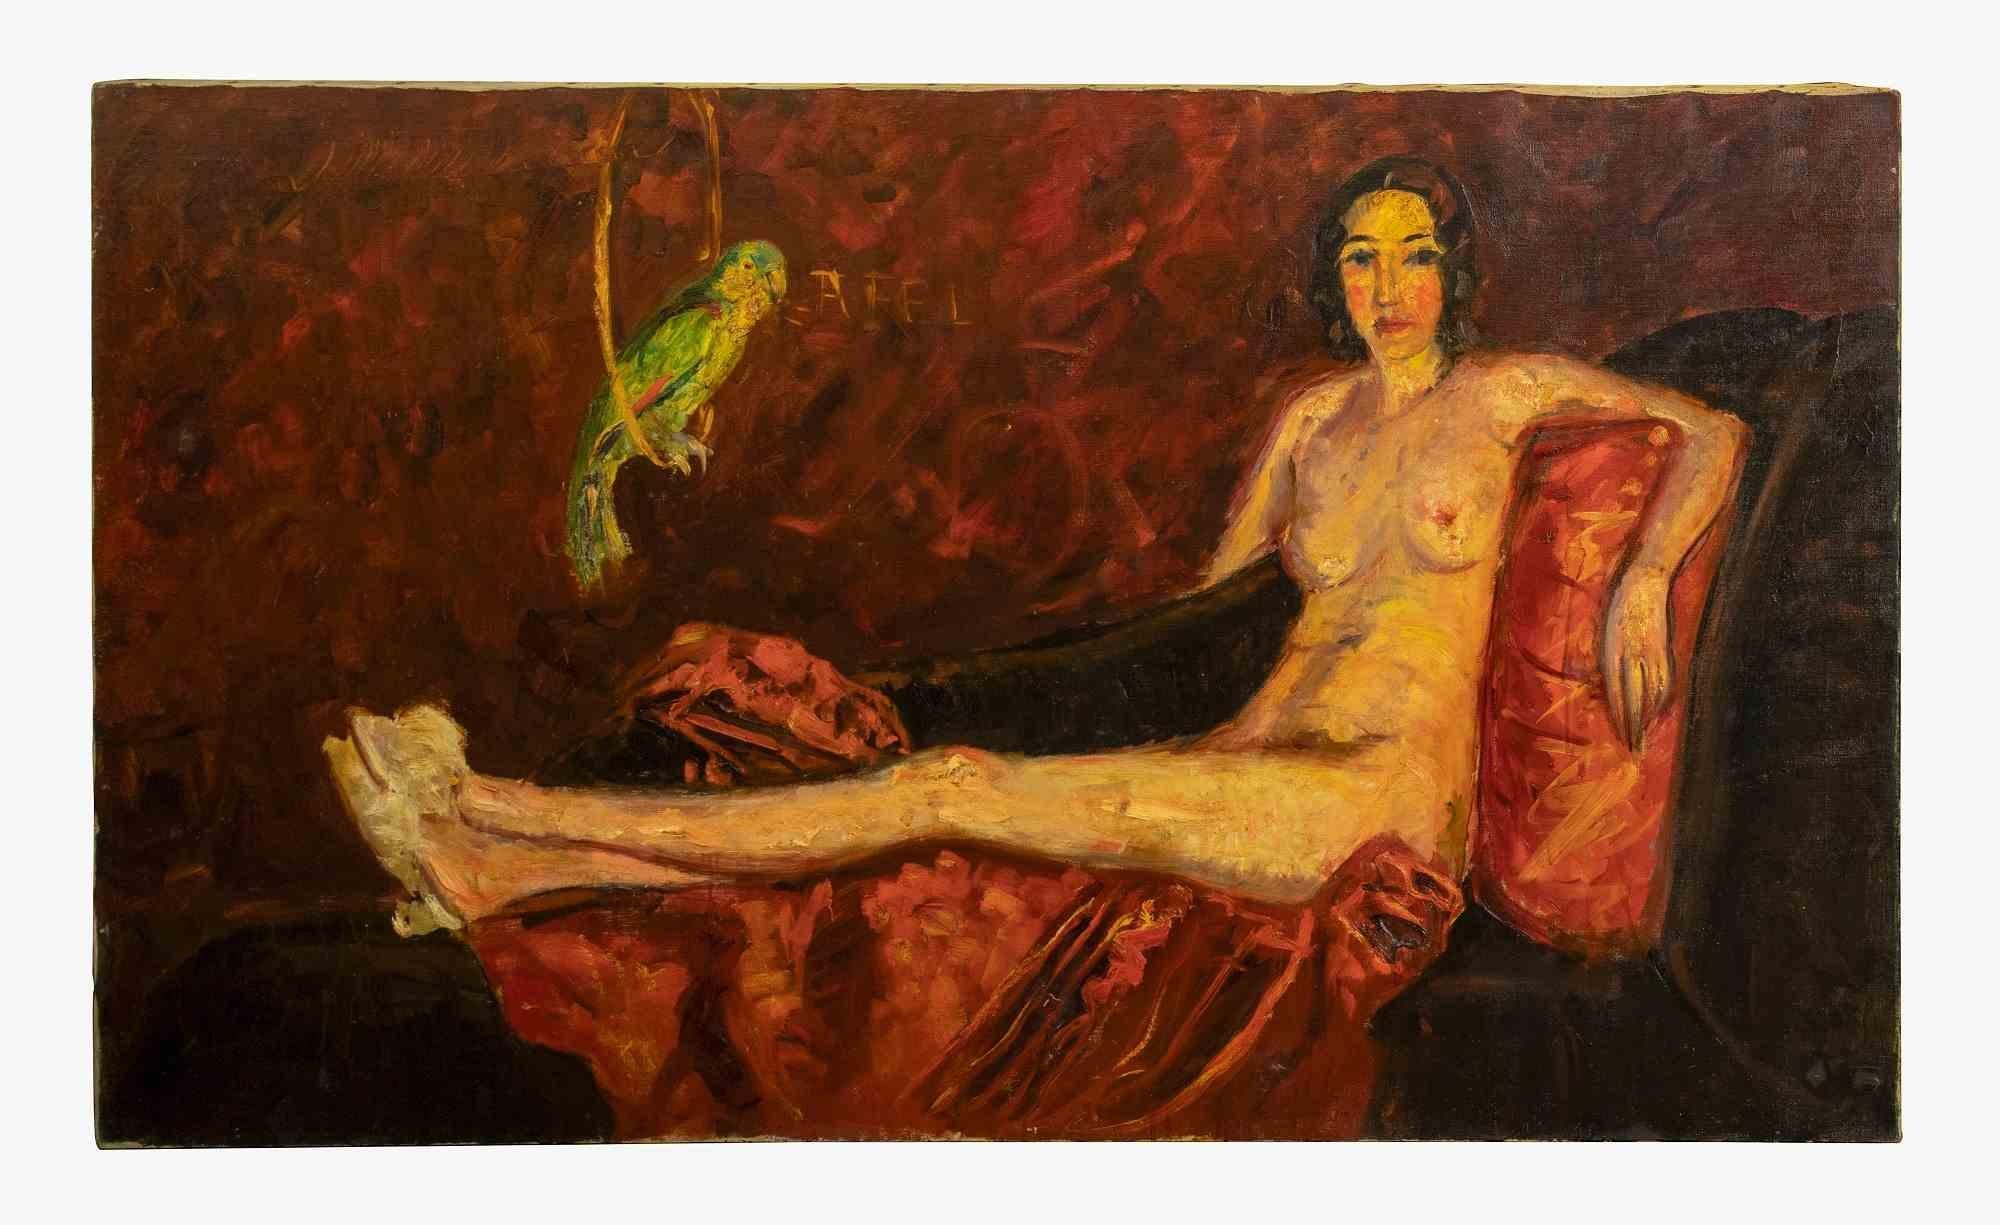 Reclined Nude with Parrot is an original artwork realized by the Italian artist  Antonio Feltrinelli in 1930s.

Oil on canvas

Beautiful and representative artwork depicting a reclined nude female figure.

Antonio Feltrinelli (Milan, 1887 –